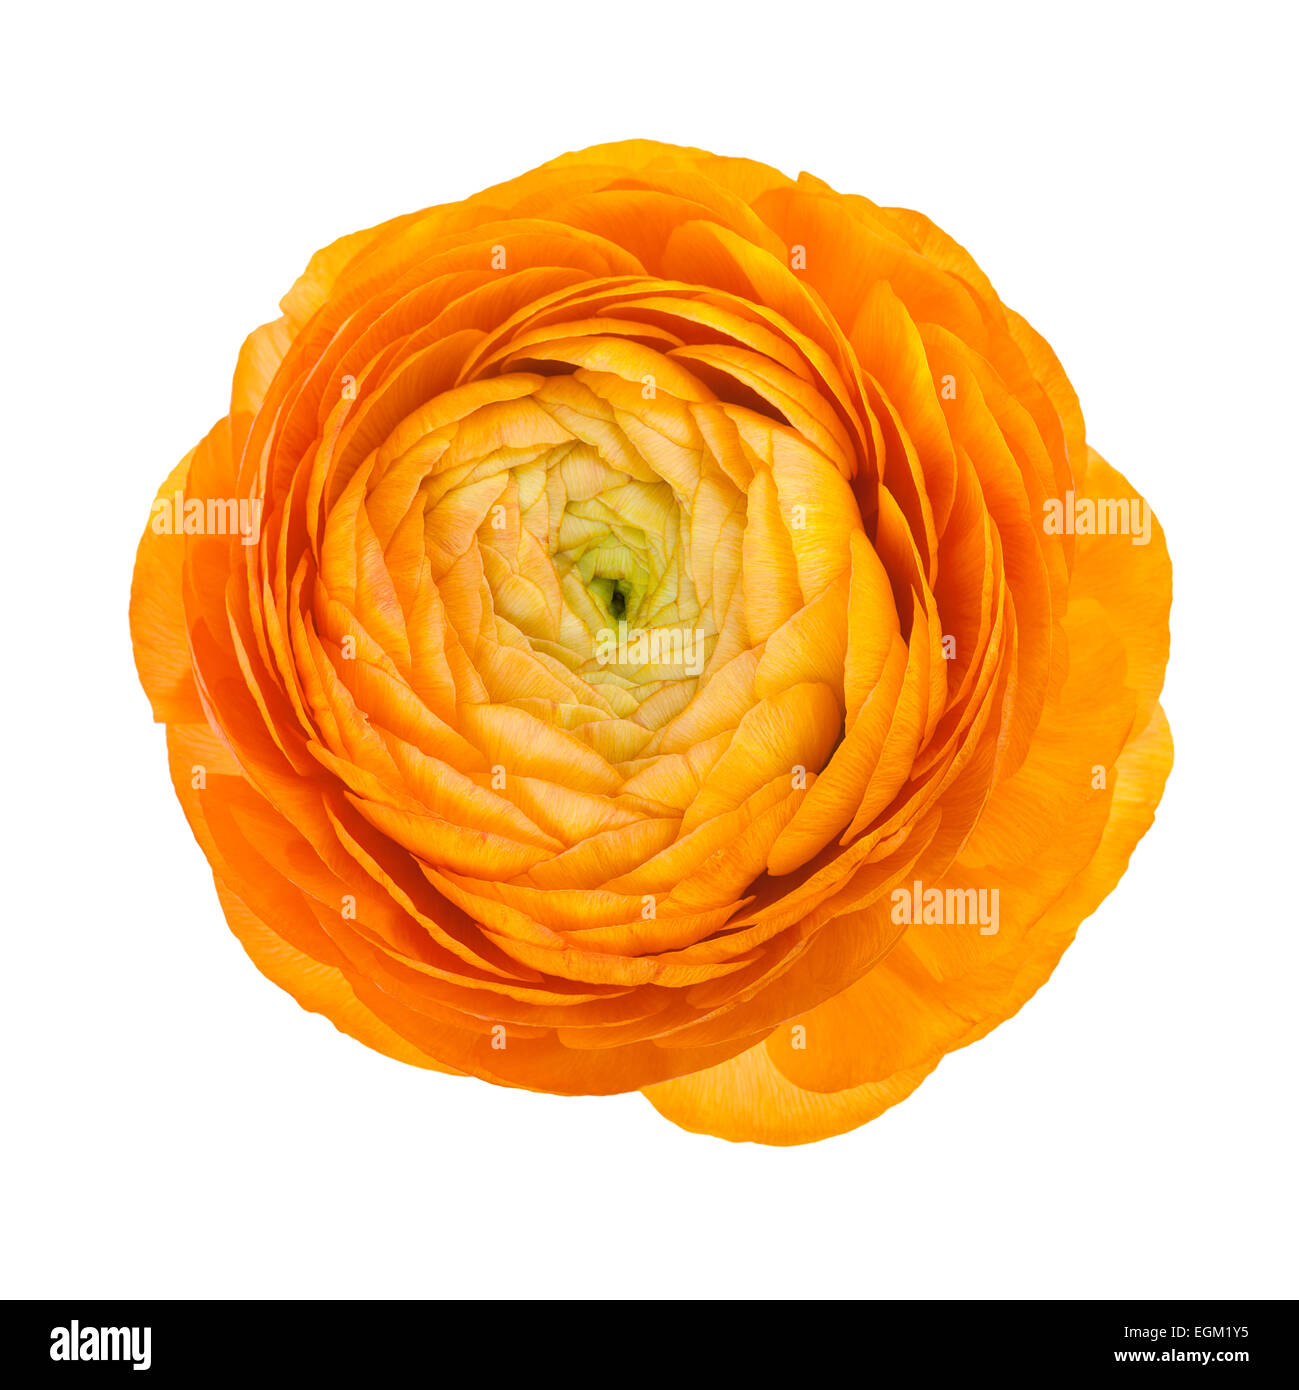 Orange flower isolated on white Banque D'Images